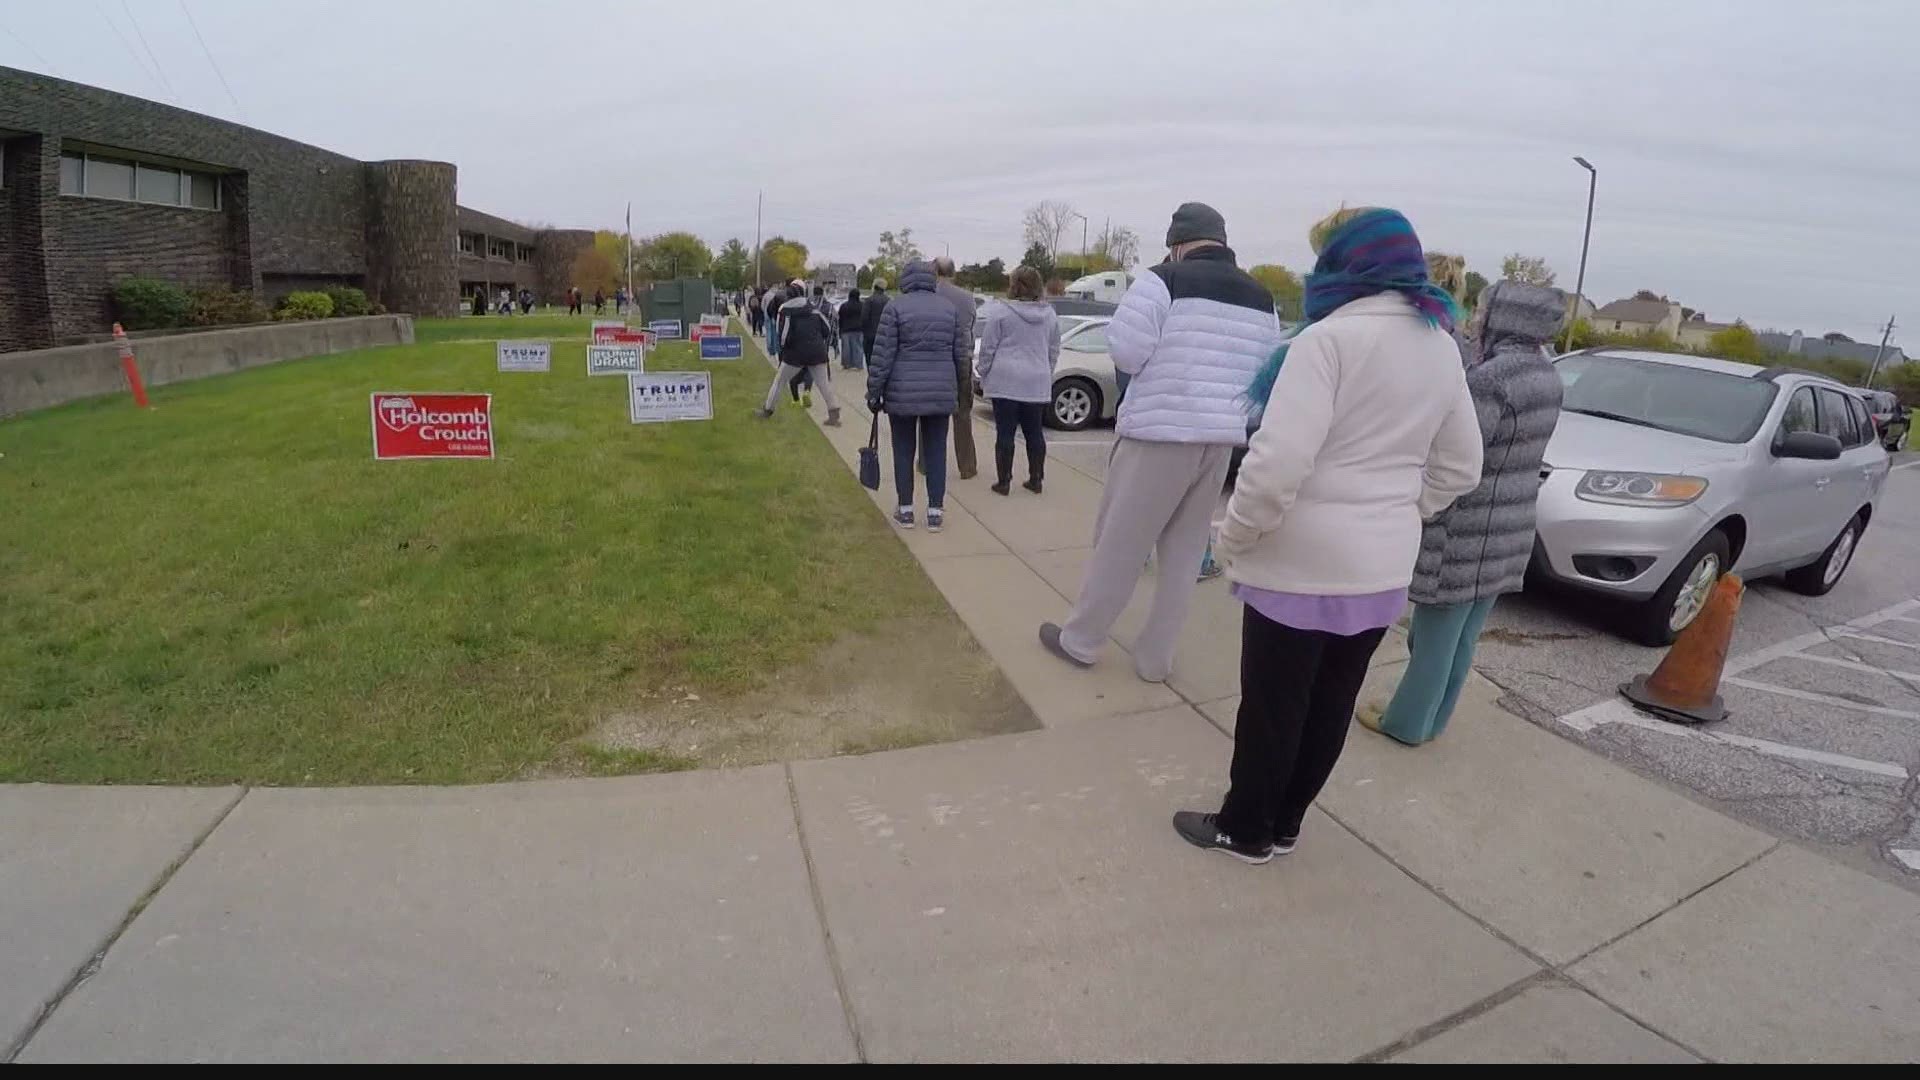 It comes after five additional polling locations opened this weekend.